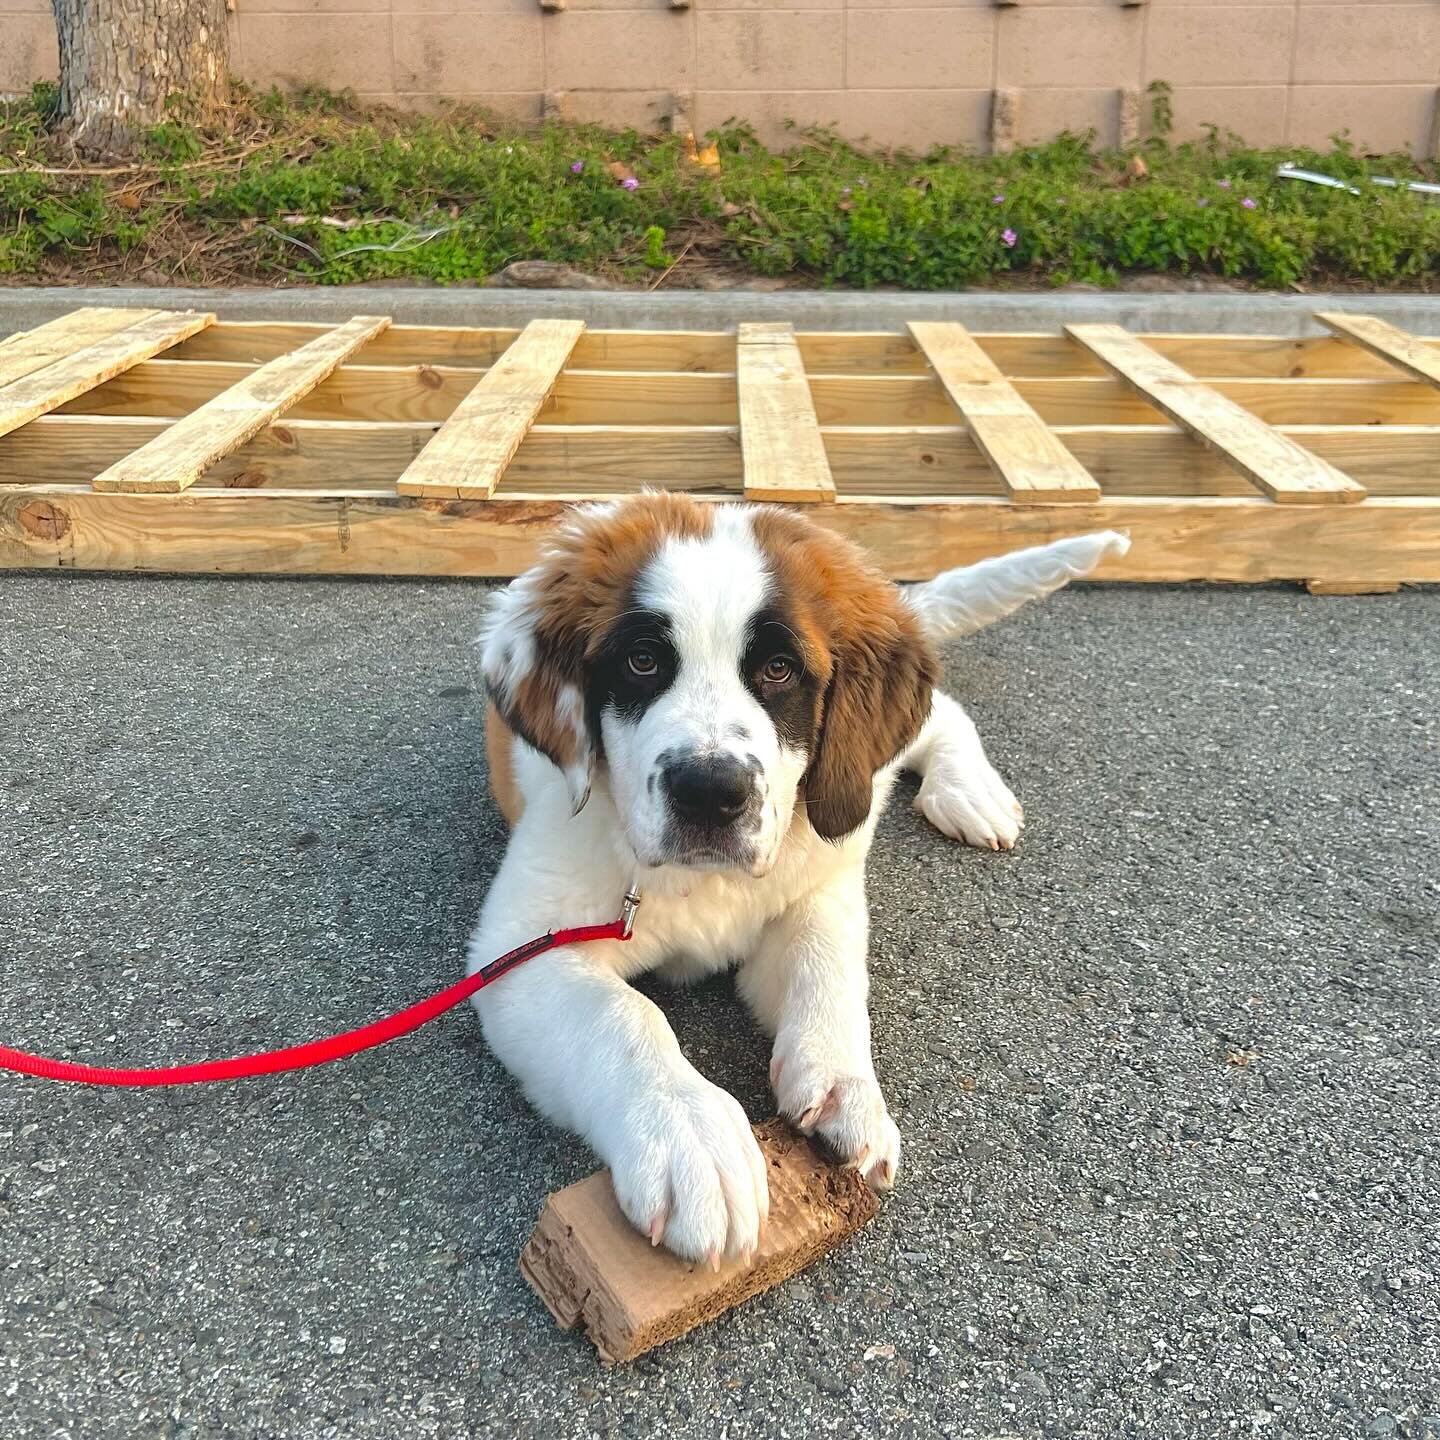 Meet our newest little puppy student ✨Kirby✨😍
Kirby is a 4 month old St. Bernard who has enrolled in our Private Sessions and Puppy to work on building his confidence and basic obedience skills🐾
#dogtraining #basicobedience #basicobediencetraining 